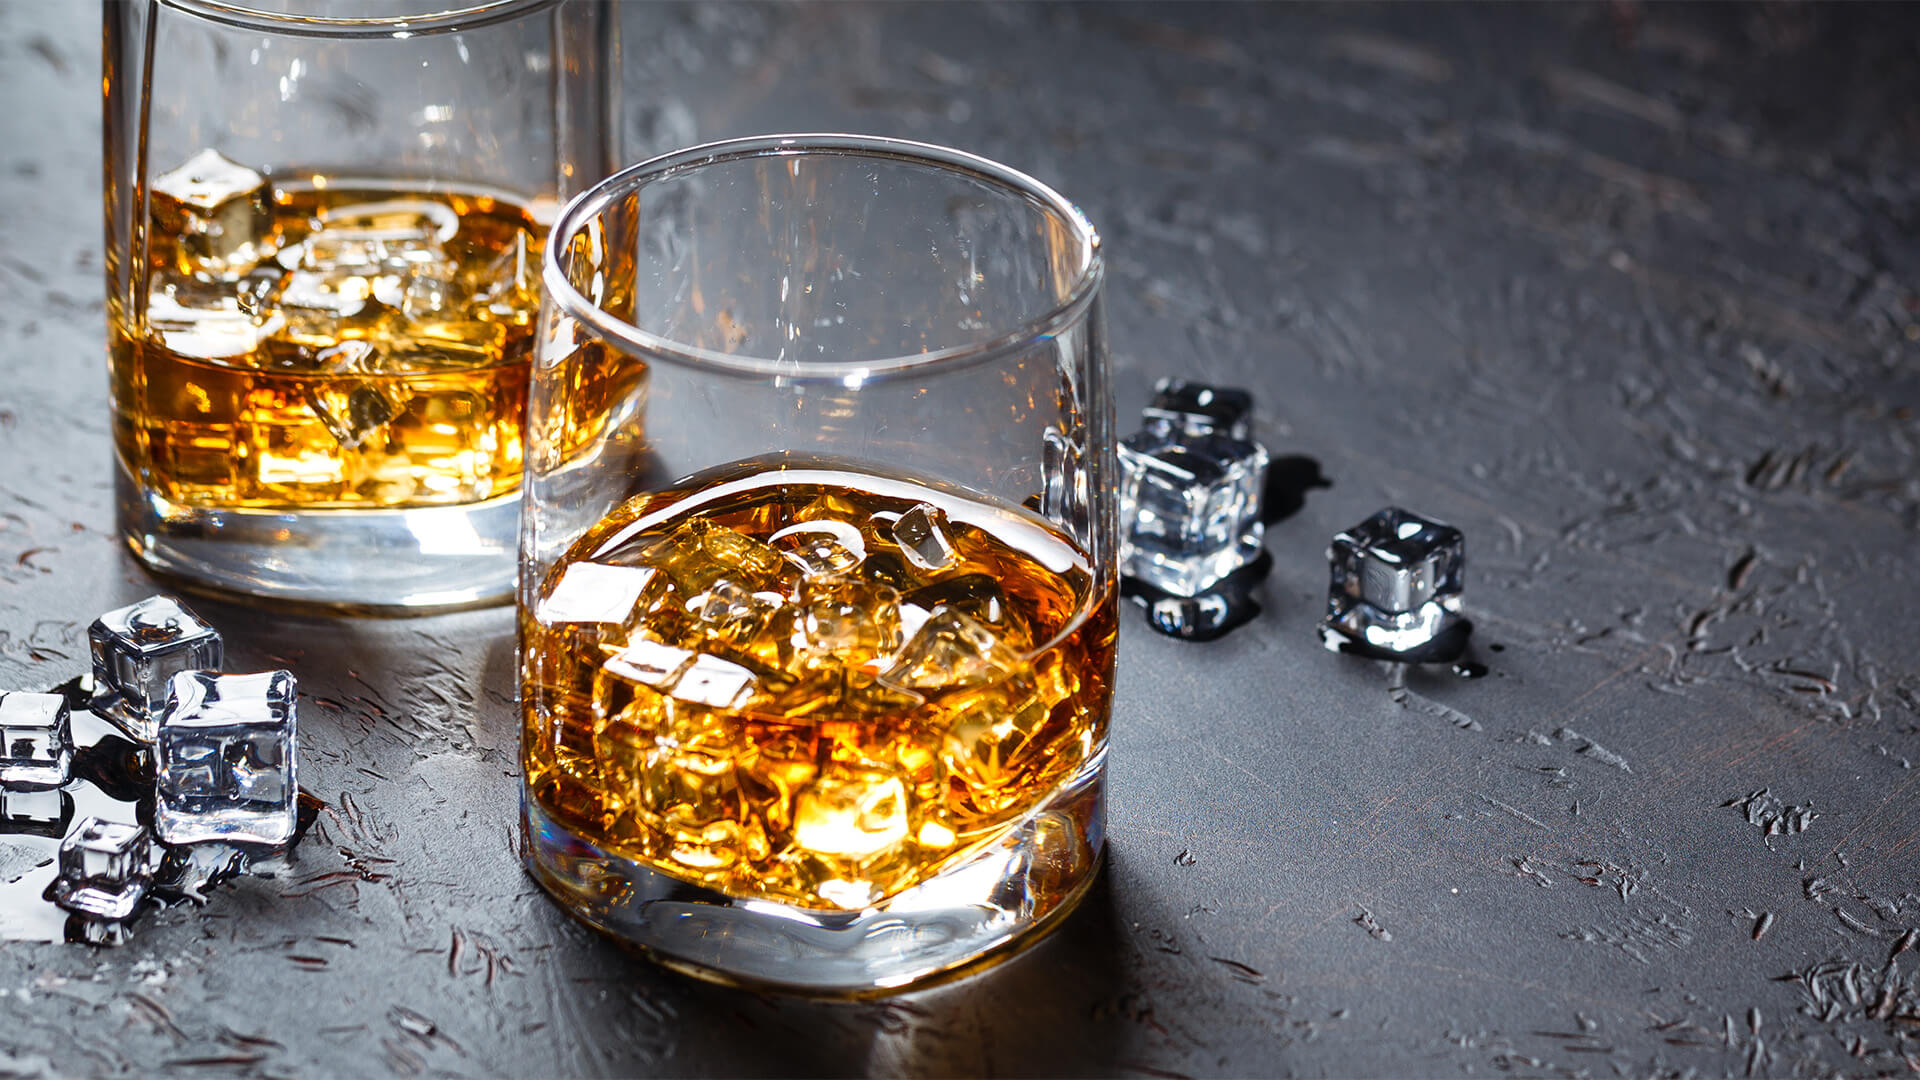 Two Whiskey glasses, on a slate surface. There is whiskey and ice in each glass, and a few scattered ice cubes on the surface